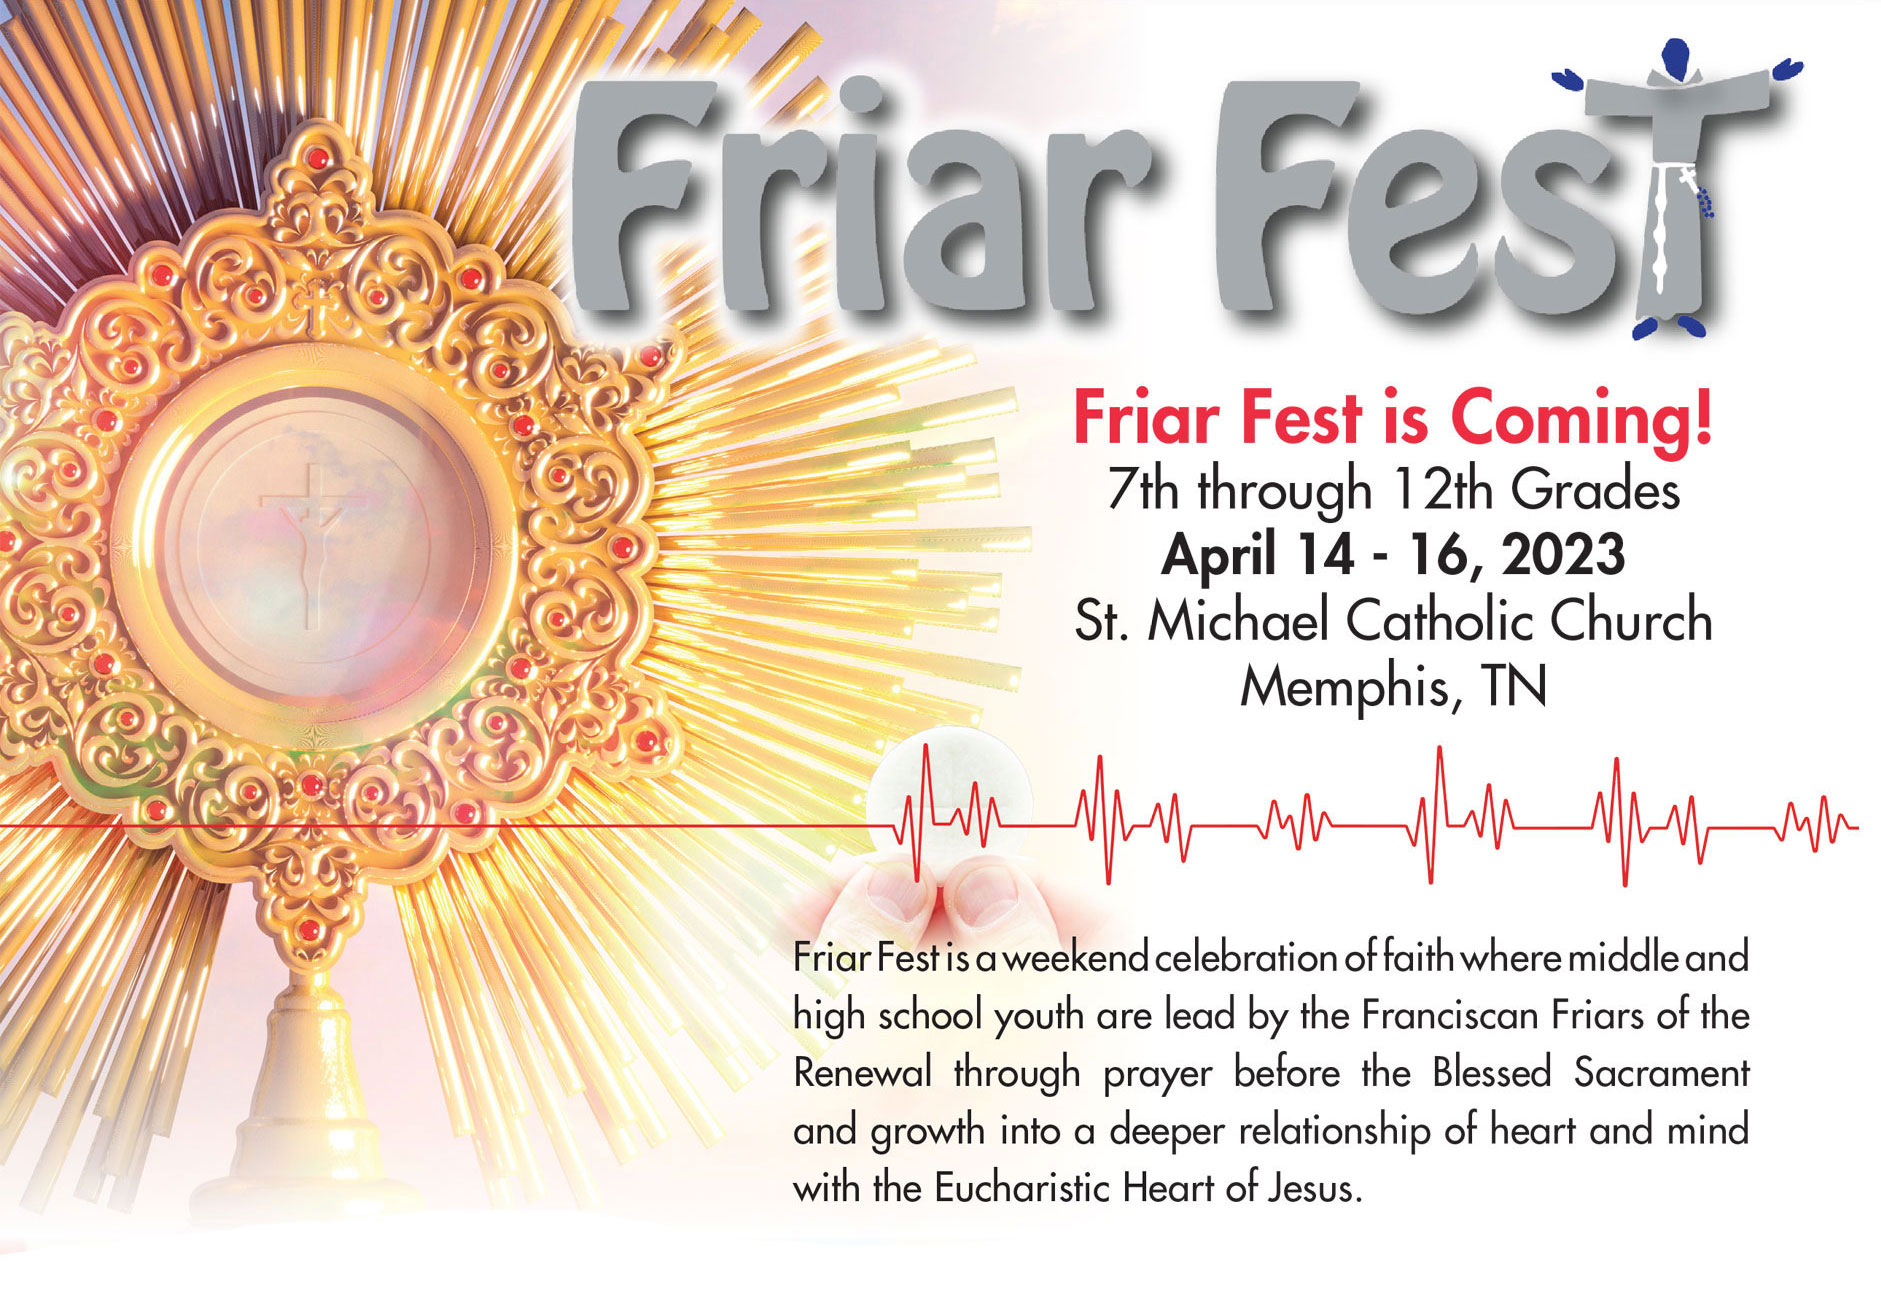 Friar Fest is Coming!